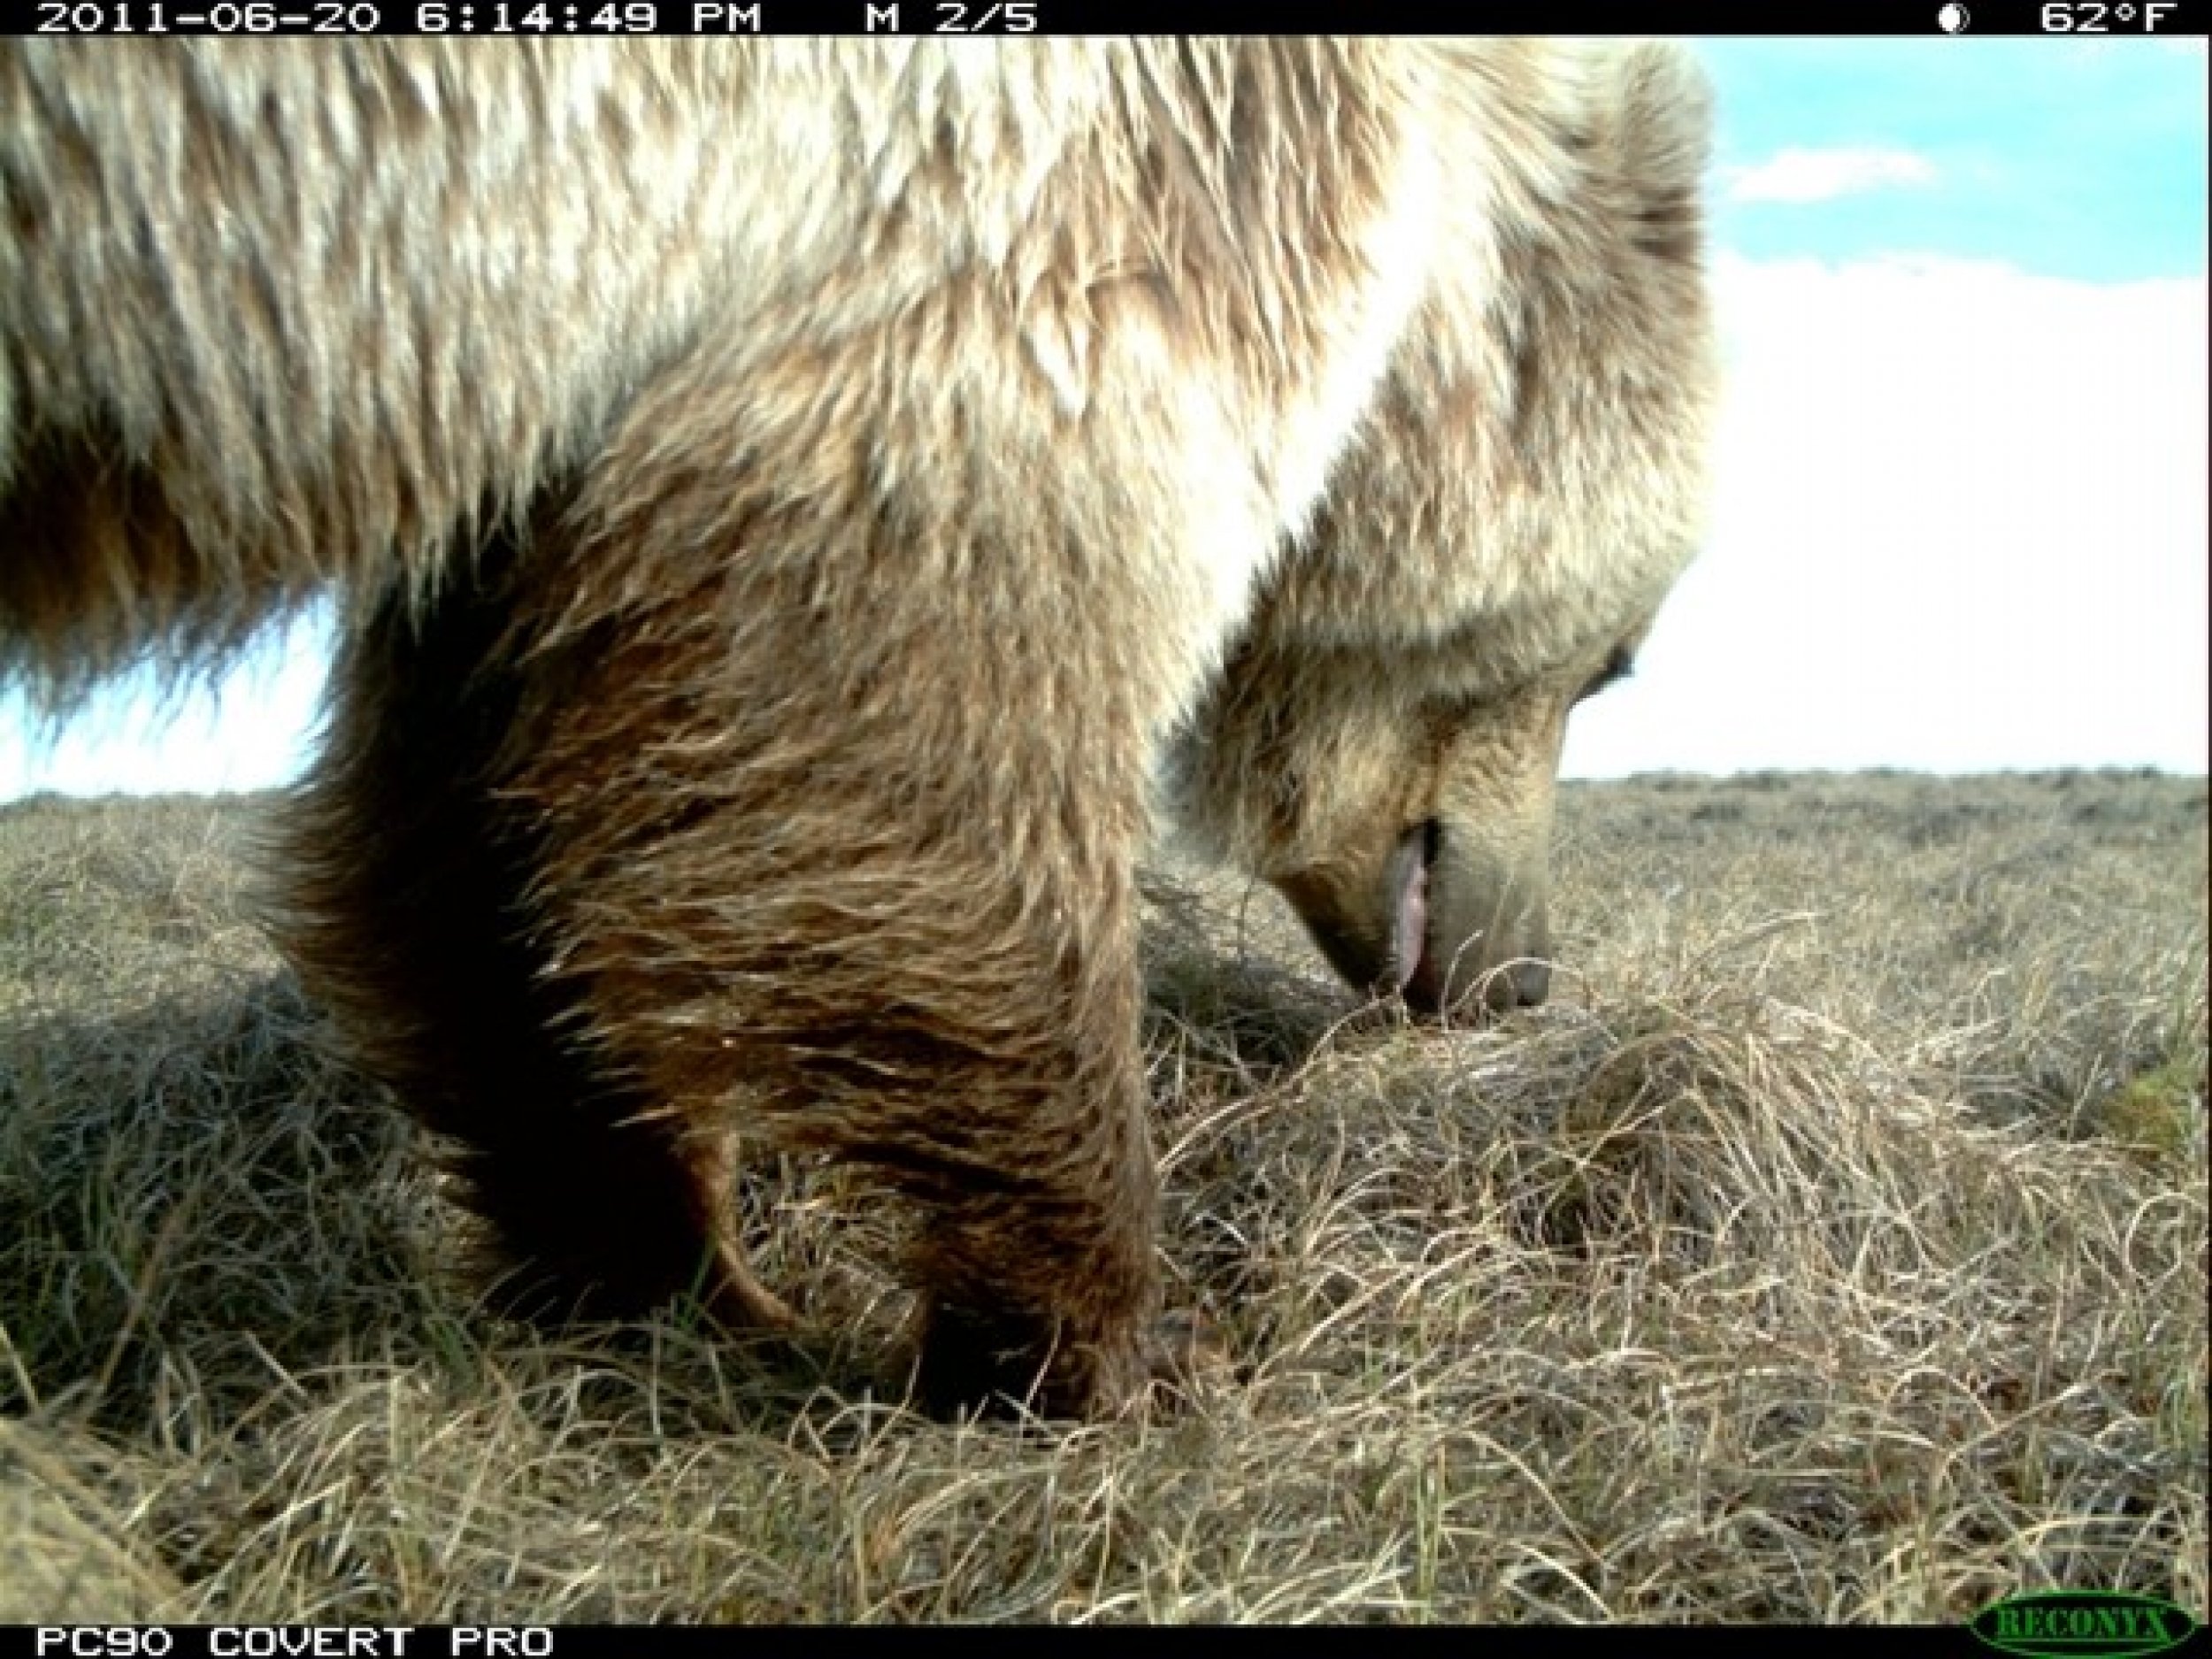 Grizzly bear sniffing around close to camera. 